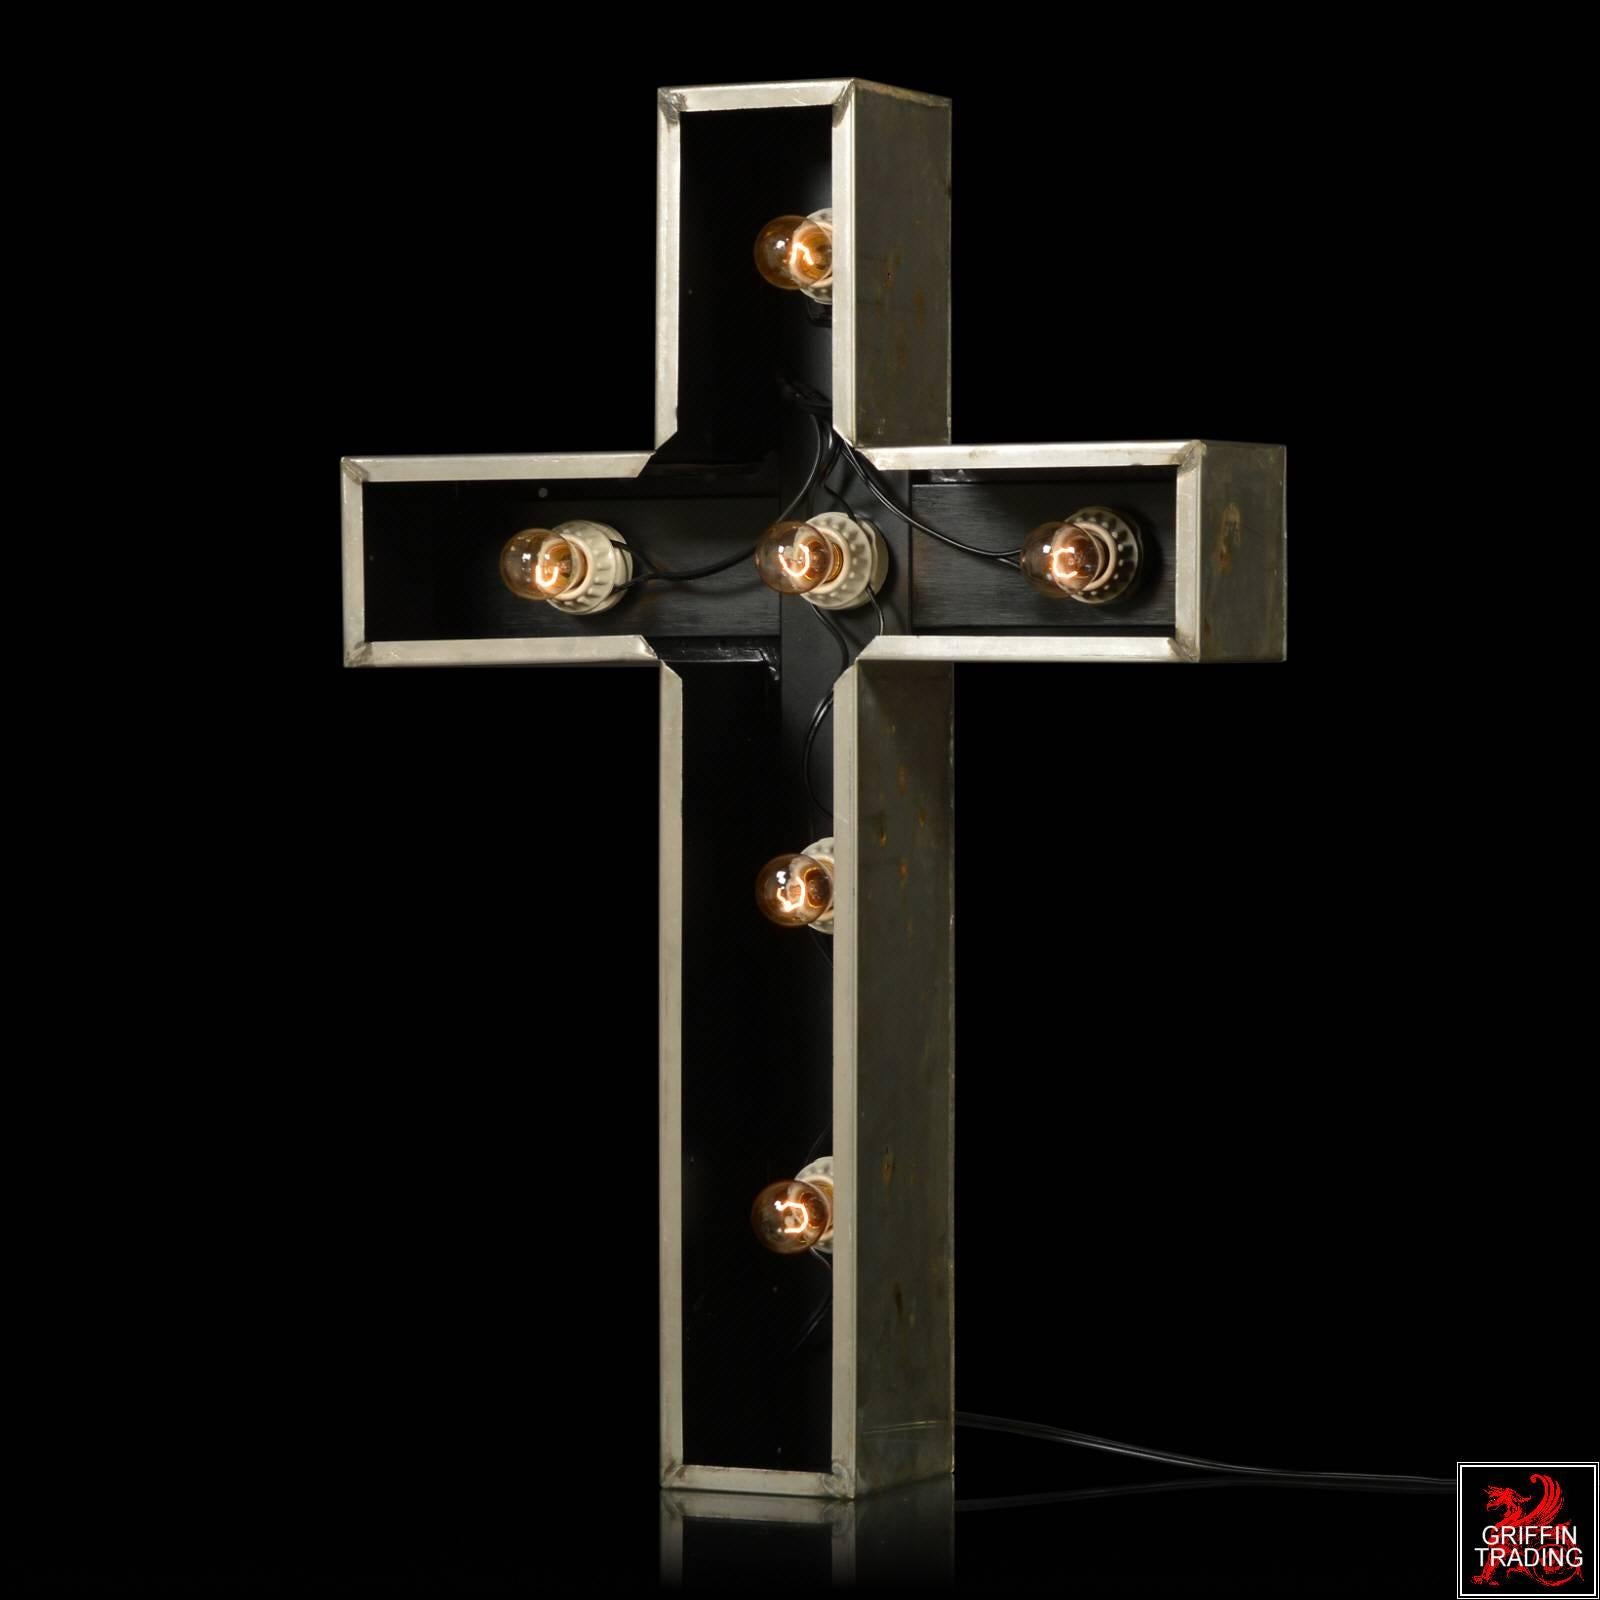 This large lighted cross sign is made of stainless steel and is the first and only one we have ever seen. It was most likely made as a sign for a church or a chapel. Originally there would have been glass or Lucite on the inside front, that would